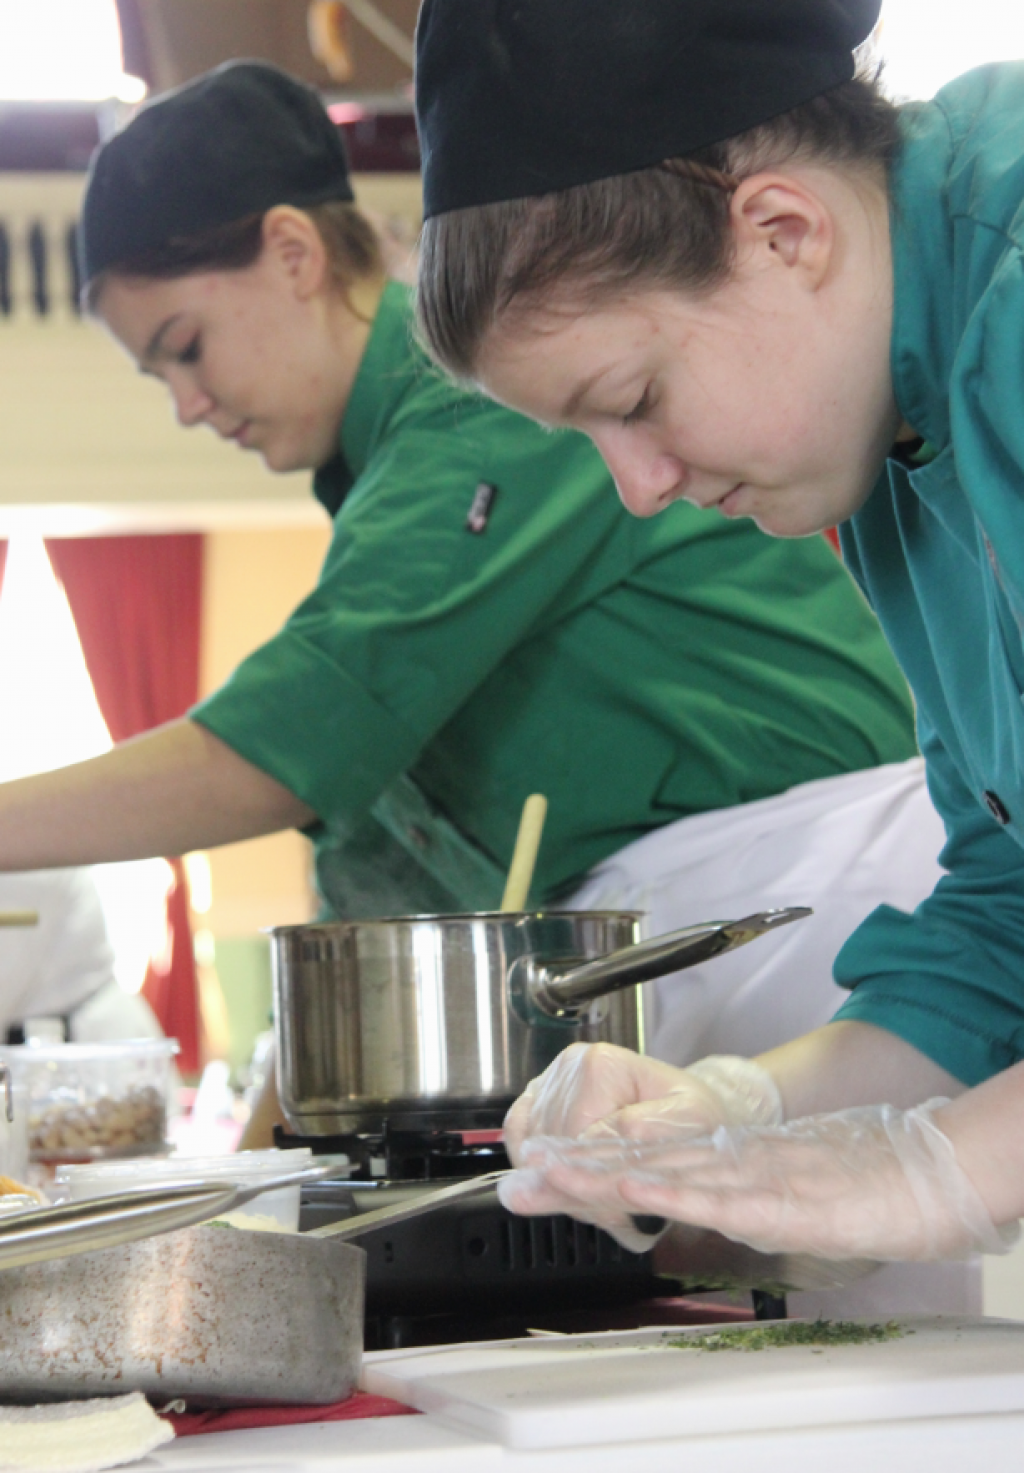 Could Castleton add culinary arts?